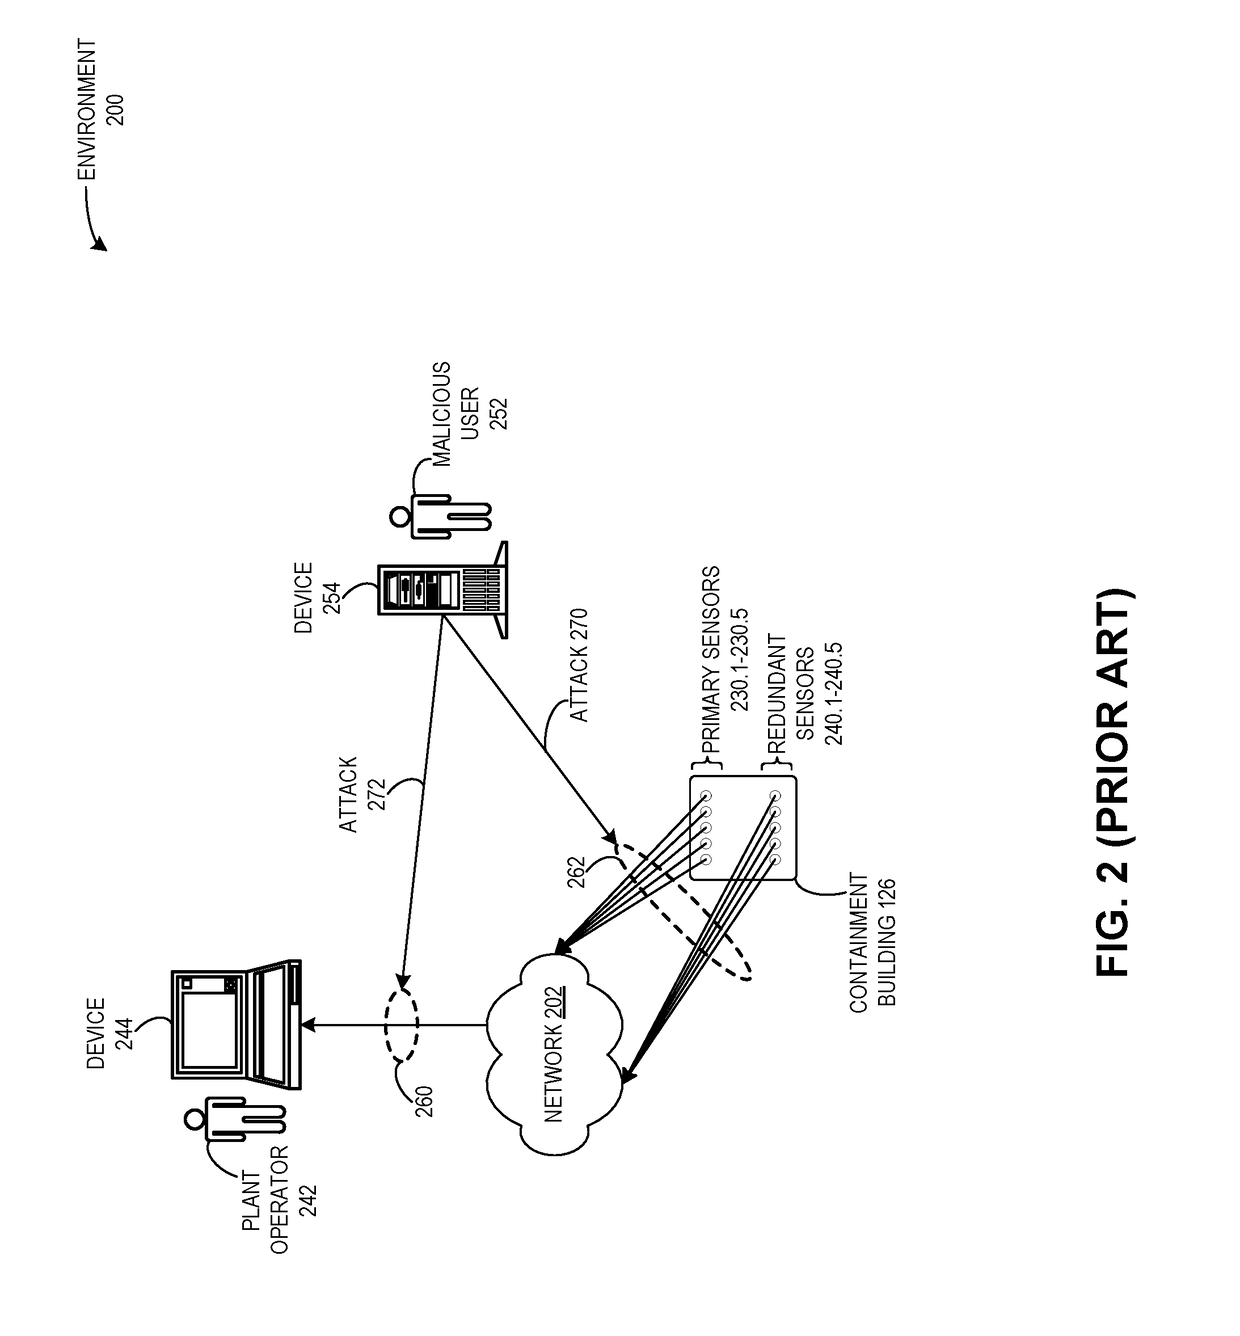 Method and system for detecting attacks on cyber-physical systems using redundant devices and smart contracts